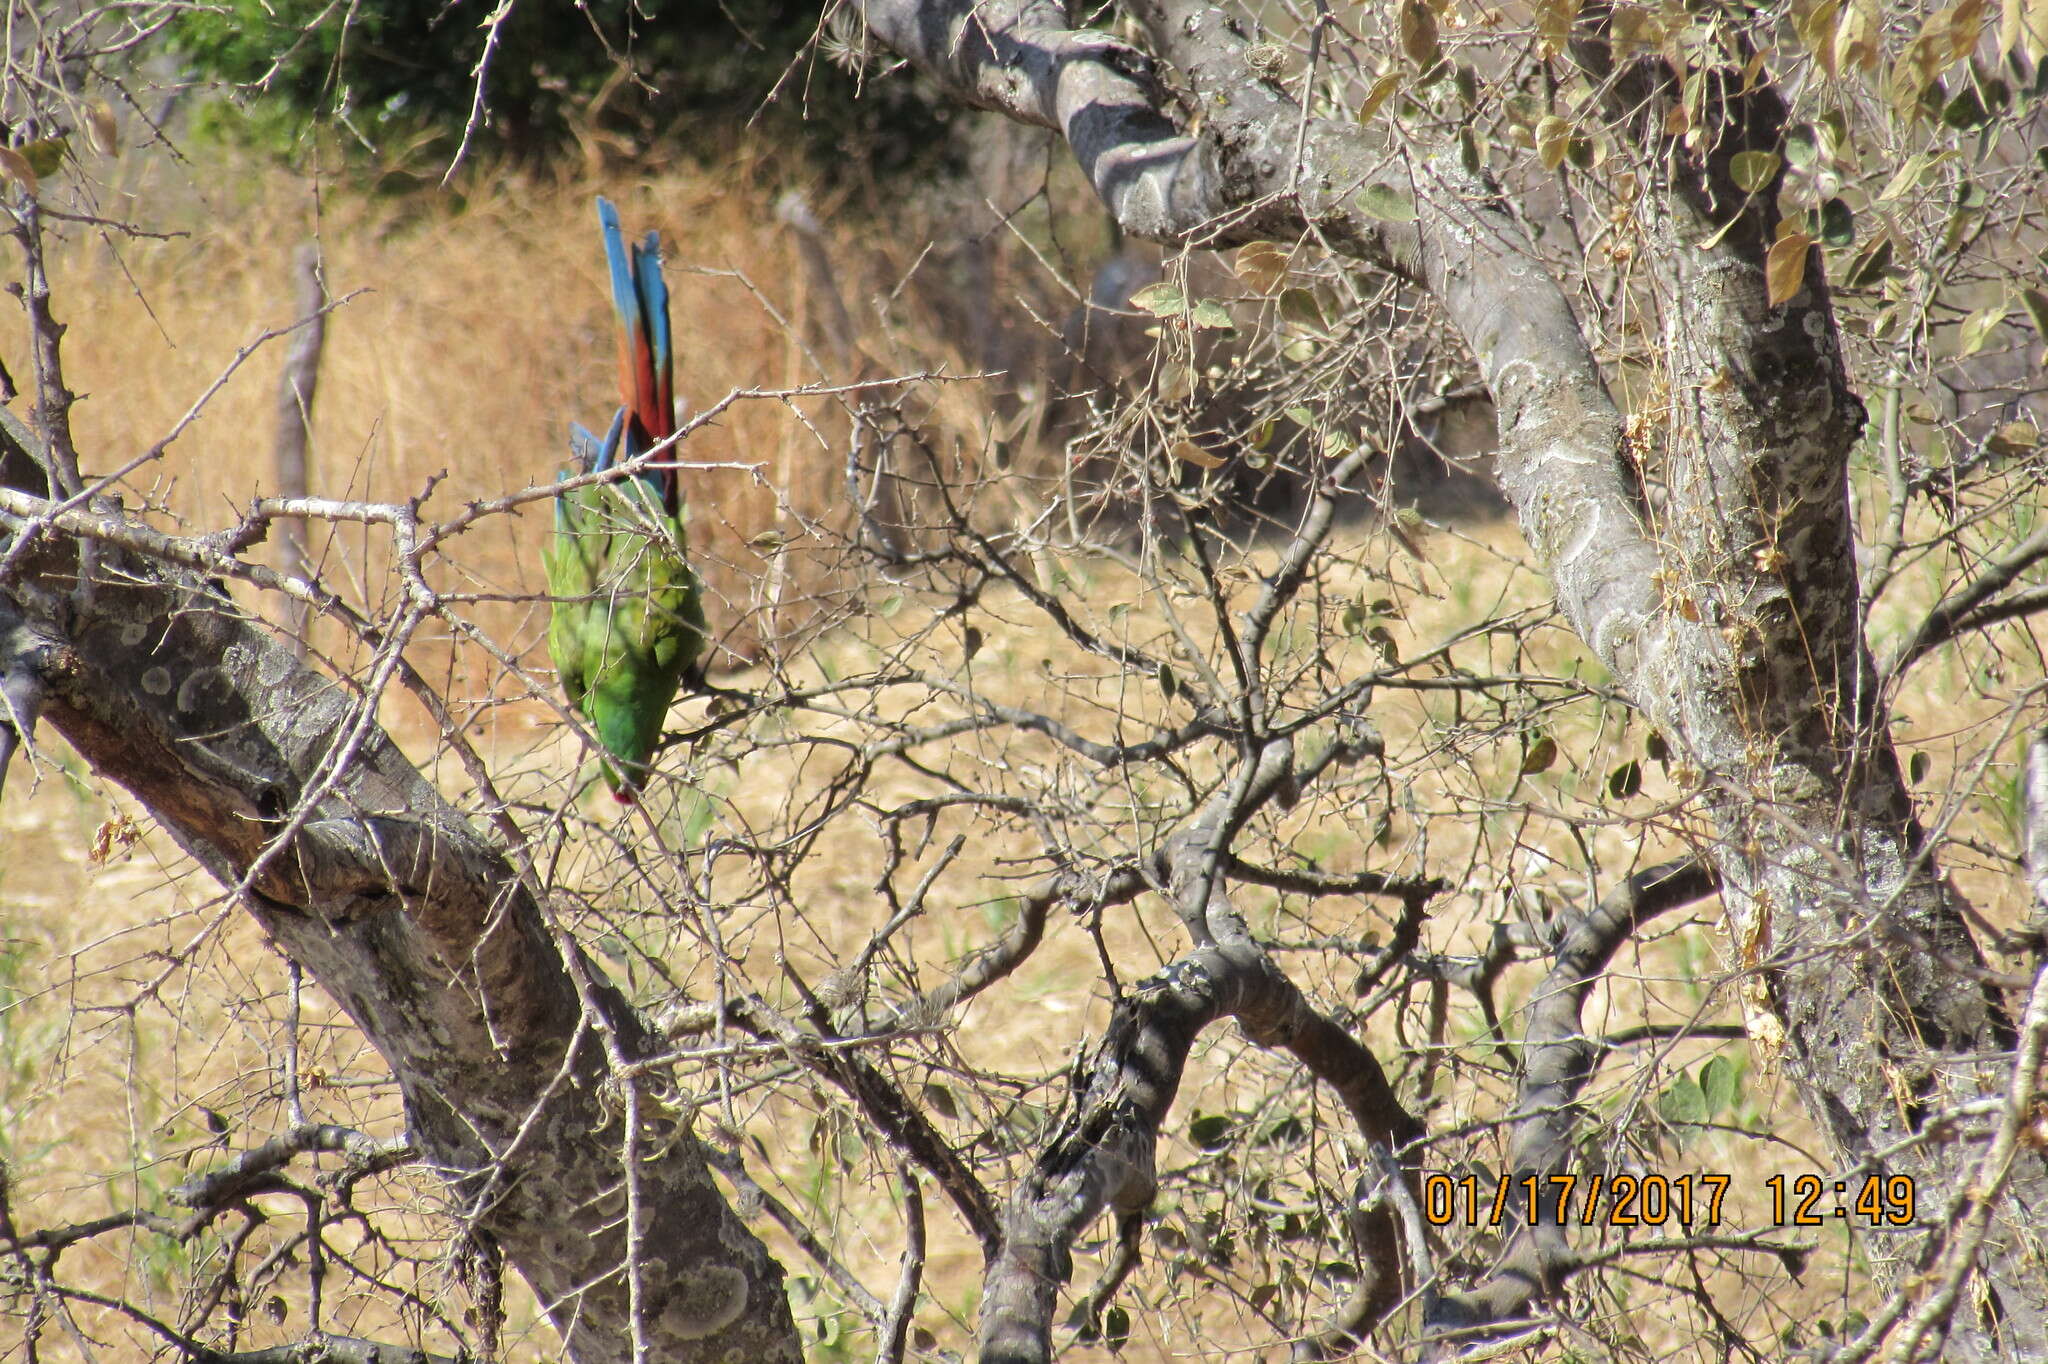 Image of Military Macaw